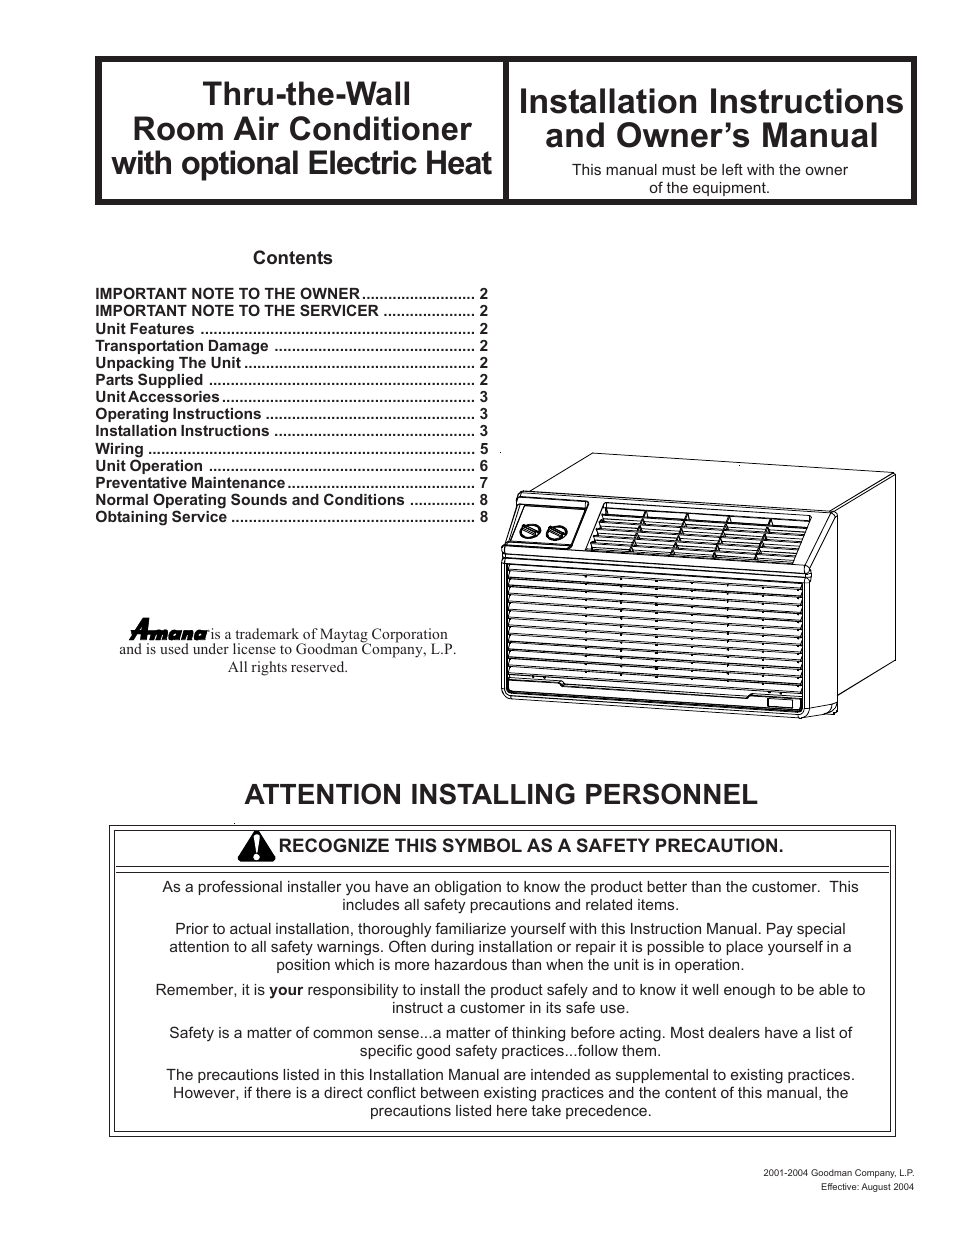 Maytag Thru-the-Wall Room Air Conditioner User Manual | 8 pages